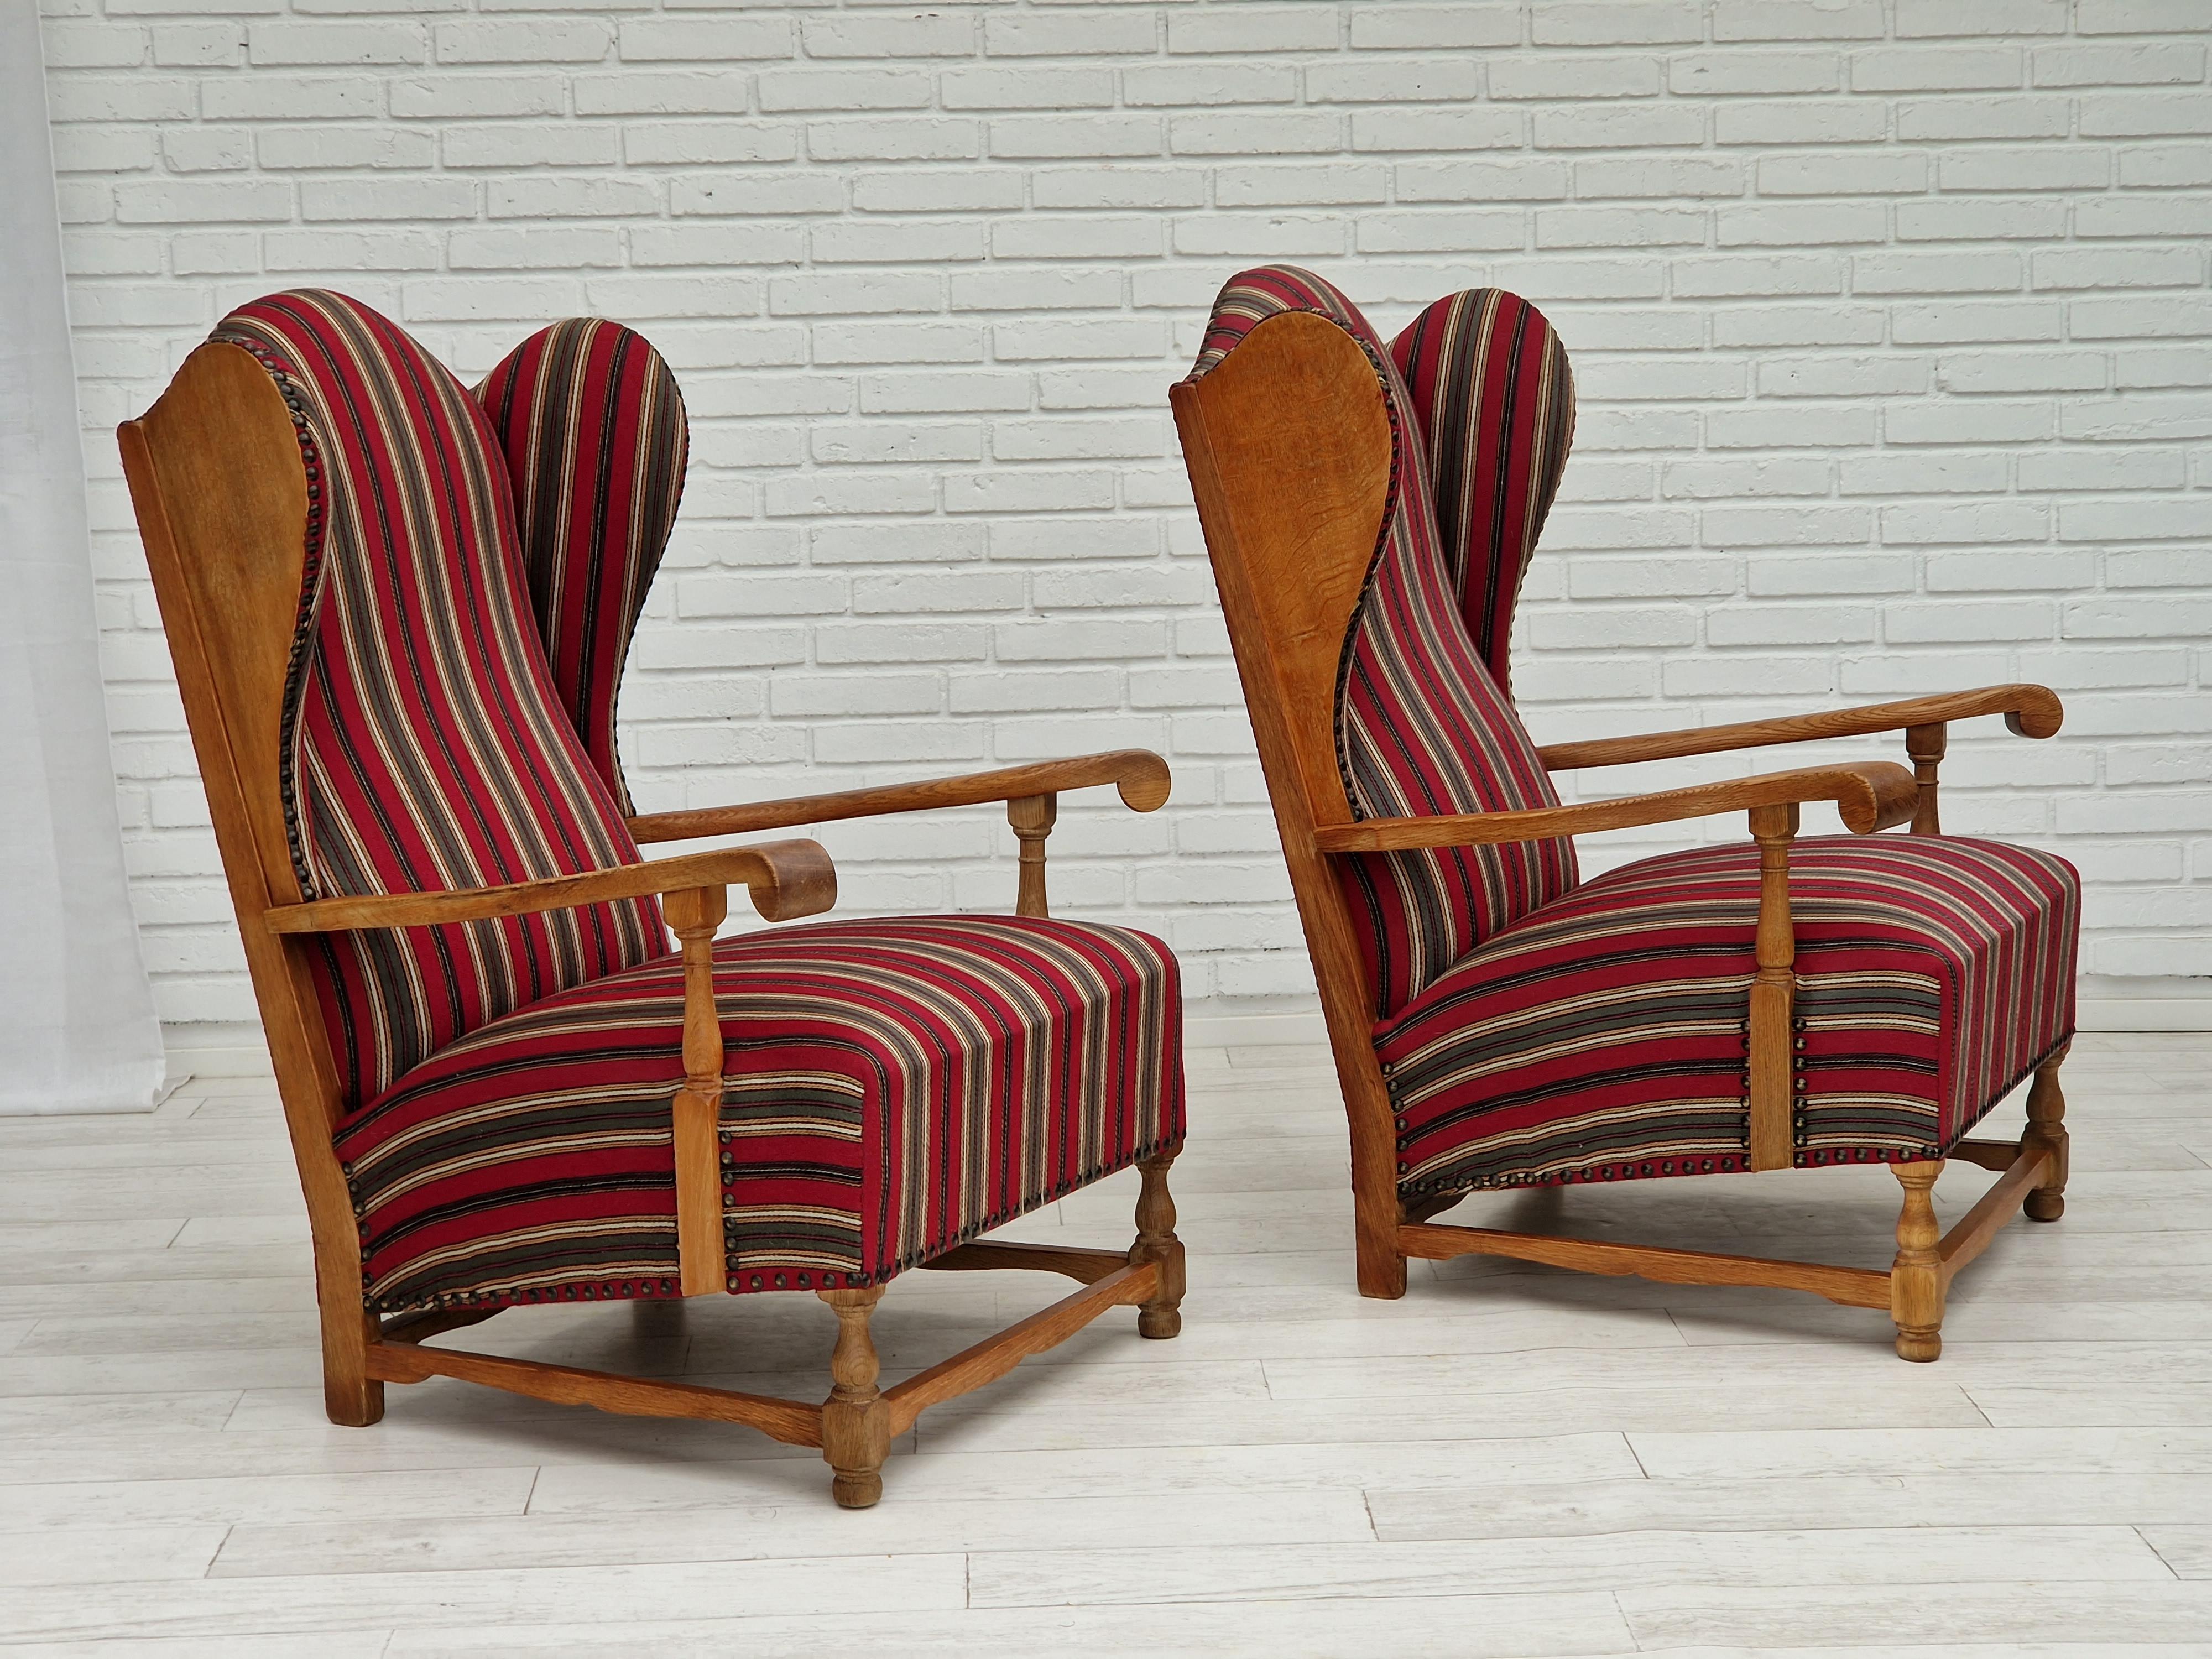 Scandinavian Modern 1960s, Vintage Danish, Pair of Relax Chair, Original Condition For Sale